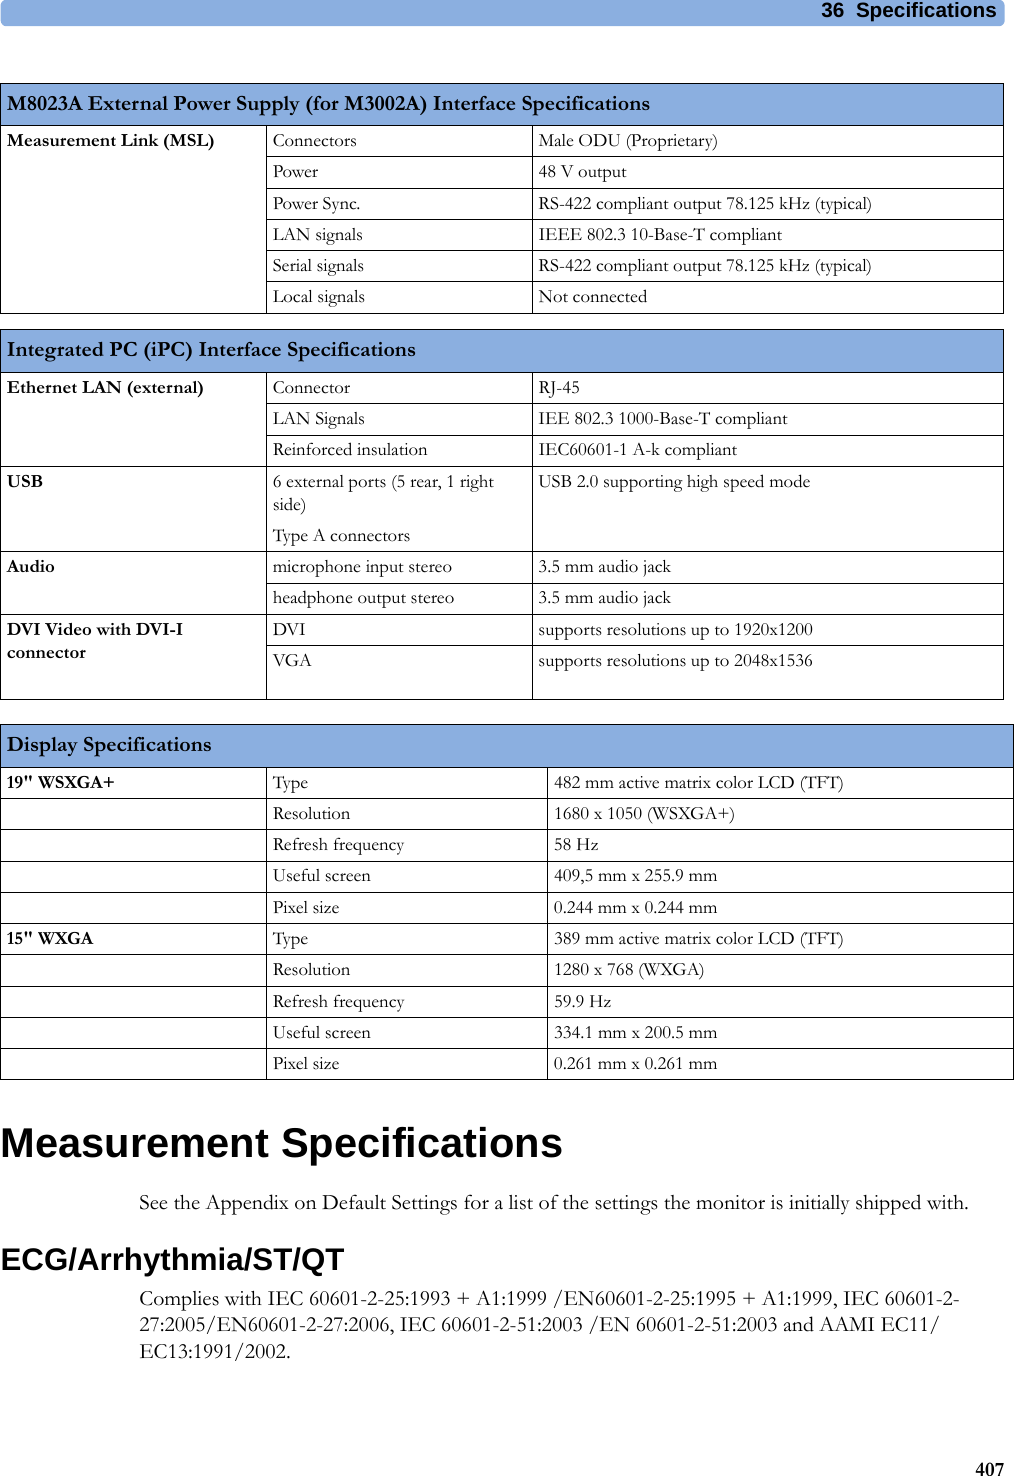 36 Specifications407Measurement SpecificationsSee the Appendix on Default Settings for a list of the settings the monitor is initially shipped with.ECG/Arrhythmia/ST/QTComplies with IEC 60601-2-25:1993 + A1:1999 /EN60601-2-25:1995 + A1:1999, IEC 60601-2-27:2005/EN60601-2-27:2006, IEC 60601-2-51:2003 /EN 60601-2-51:2003 and AAMI EC11/EC13:1991/2002.M8023A External Power Supply (for M3002A) Interface SpecificationsMeasurement Link (MSL) Connectors Male ODU (Proprietary)Power 48 V outputPower Sync. RS-422 compliant output 78.125 kHz (typical)LAN signals IEEE 802.3 10-Base-T compliantSerial signals RS-422 compliant output 78.125 kHz (typical)Local signals Not connectedIntegrated PC (iPC) Interface SpecificationsEthernet LAN (external) Connector RJ-45LAN Signals IEE 802.3 1000-Base-T compliantReinforced insulation IEC60601-1 A-k compliantUSB  6 external ports (5 rear, 1 right side)Type A connectorsUSB 2.0 supporting high speed modeAudio microphone input stereo 3.5 mm audio jackheadphone output stereo  3.5 mm audio jackDVI Video with DVI-I connectorDVI supports resolutions up to 1920x1200VGA supports resolutions up to 2048x1536Display Specifications19&quot; WSXGA+ Type 482 mm active matrix color LCD (TFT)Resolution 1680 x 1050 (WSXGA+)Refresh frequency 58 HzUseful screen 409,5 mm x 255.9 mmPixel size 0.244 mm x 0.244 mm15&quot; WXGA Type 389 mm active matrix color LCD (TFT)Resolution 1280 x 768 (WXGA)Refresh frequency 59.9 HzUseful screen 334.1 mm x 200.5 mmPixel size 0.261 mm x 0.261 mm